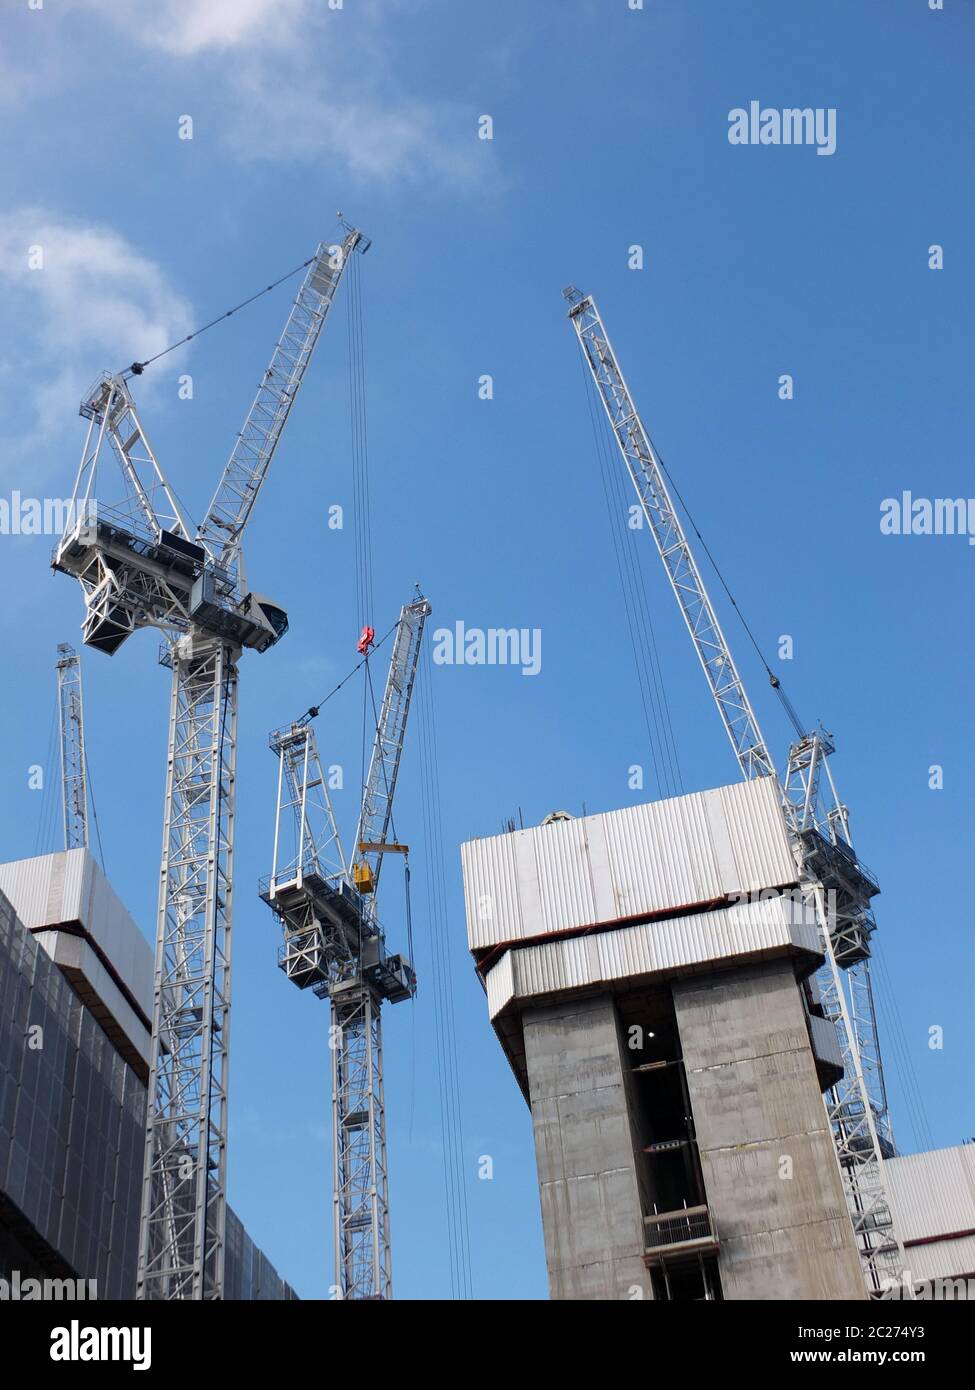 construction cranes working in a large development site with concrete large structure Stock Photo